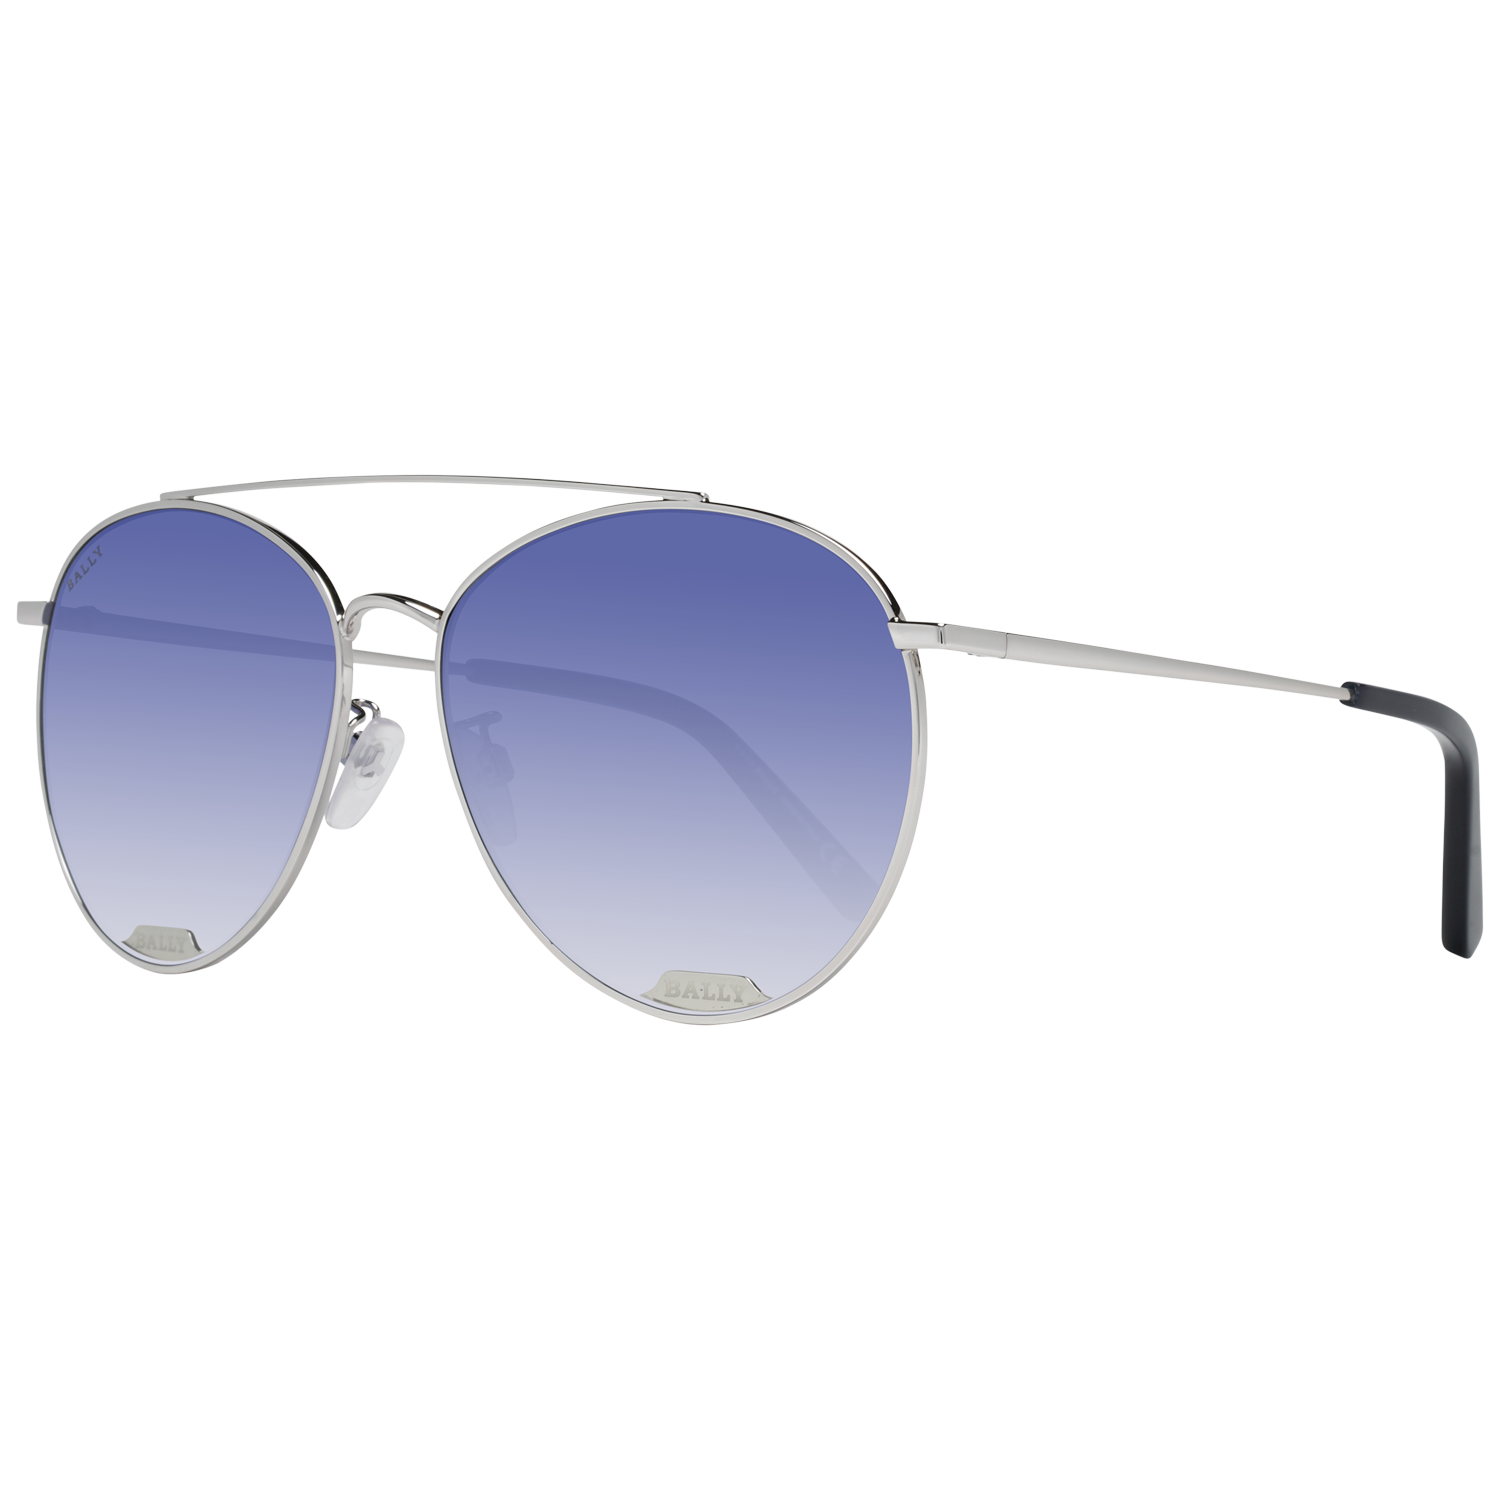 Bally Sunglasses BY0016-D 18W 60 Silver